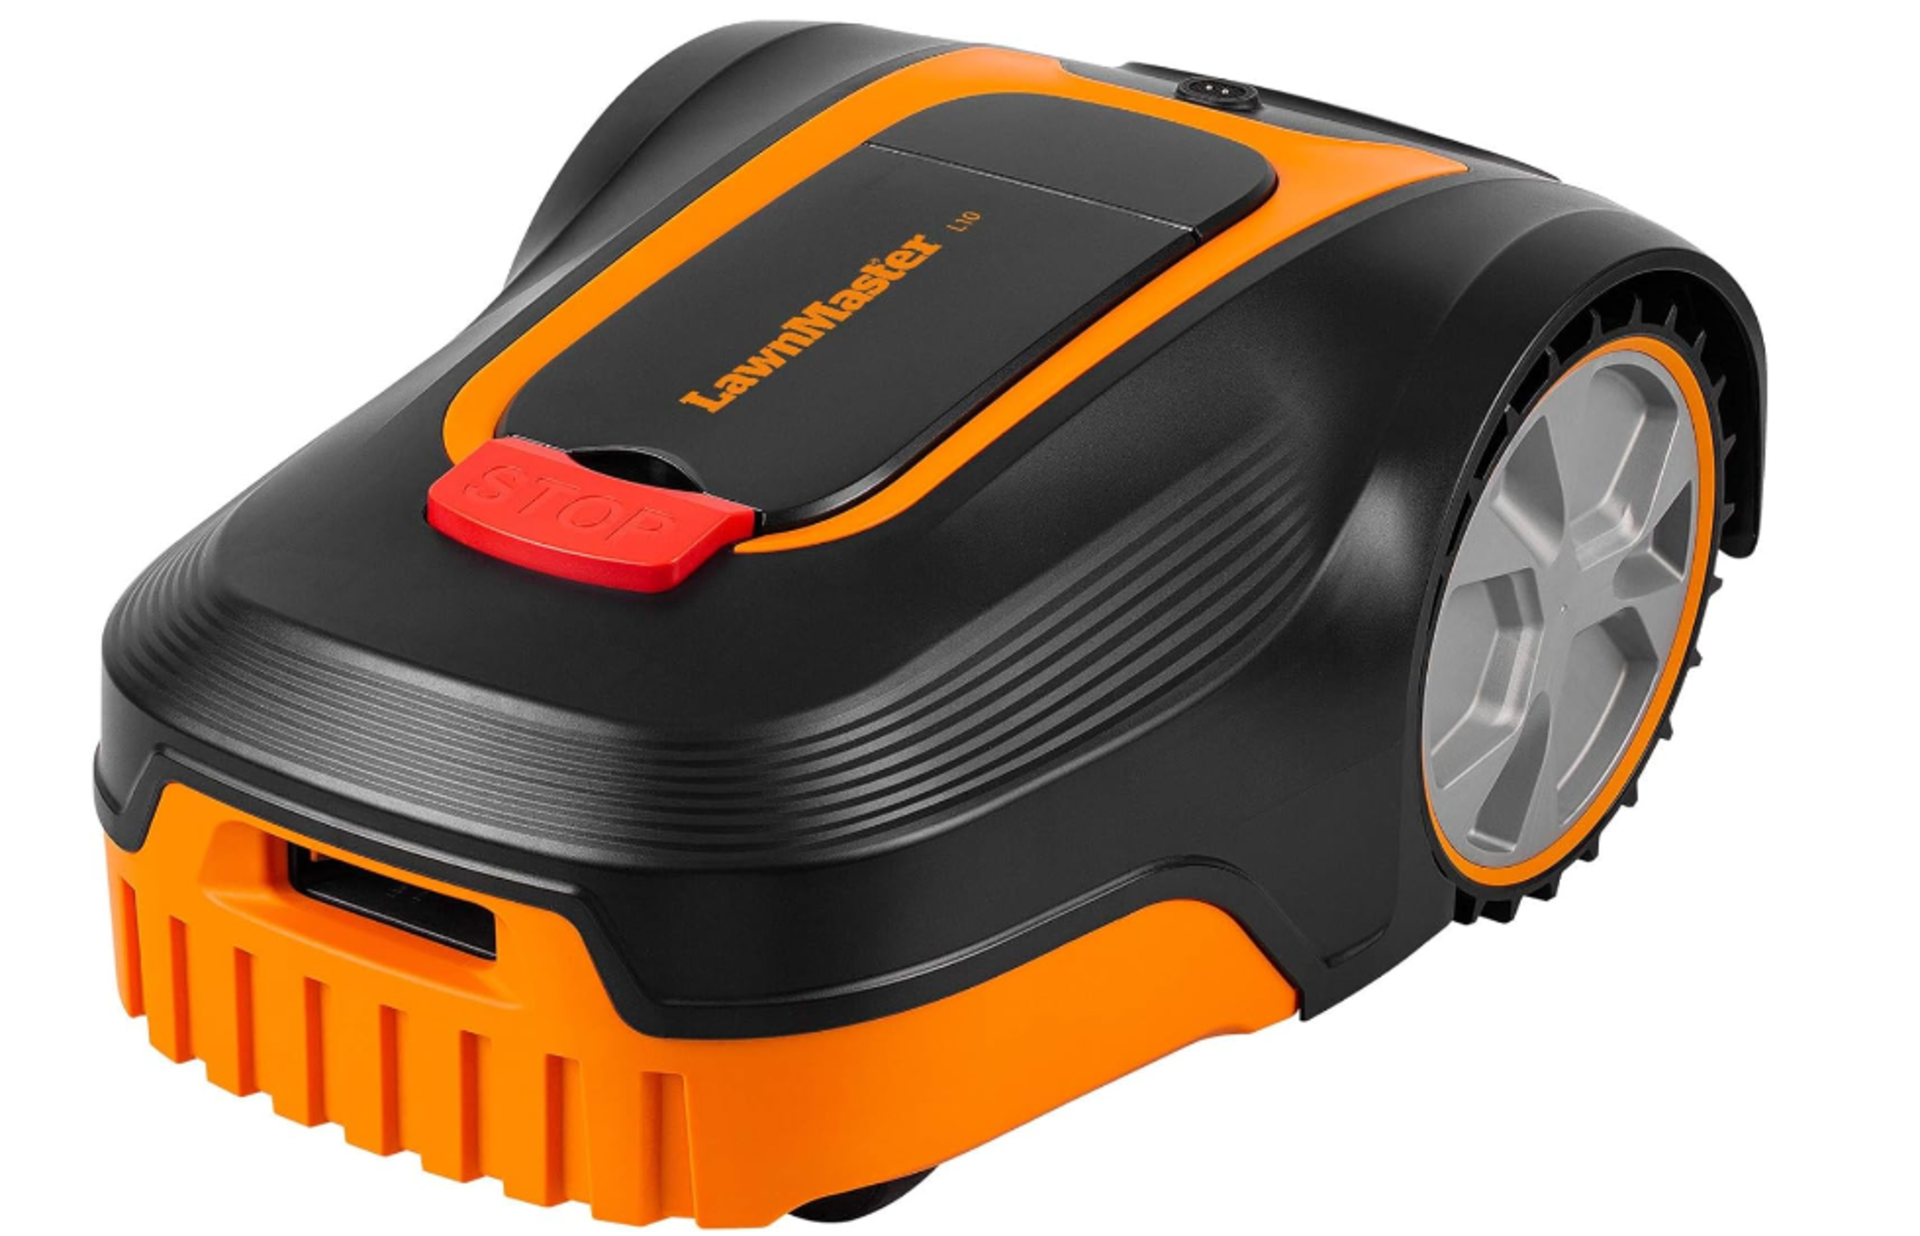 Cleva LawnMaster L10 Robot Lawn Mower RRP 399.99 About the Product(s) The LawnMaster L10 Robot